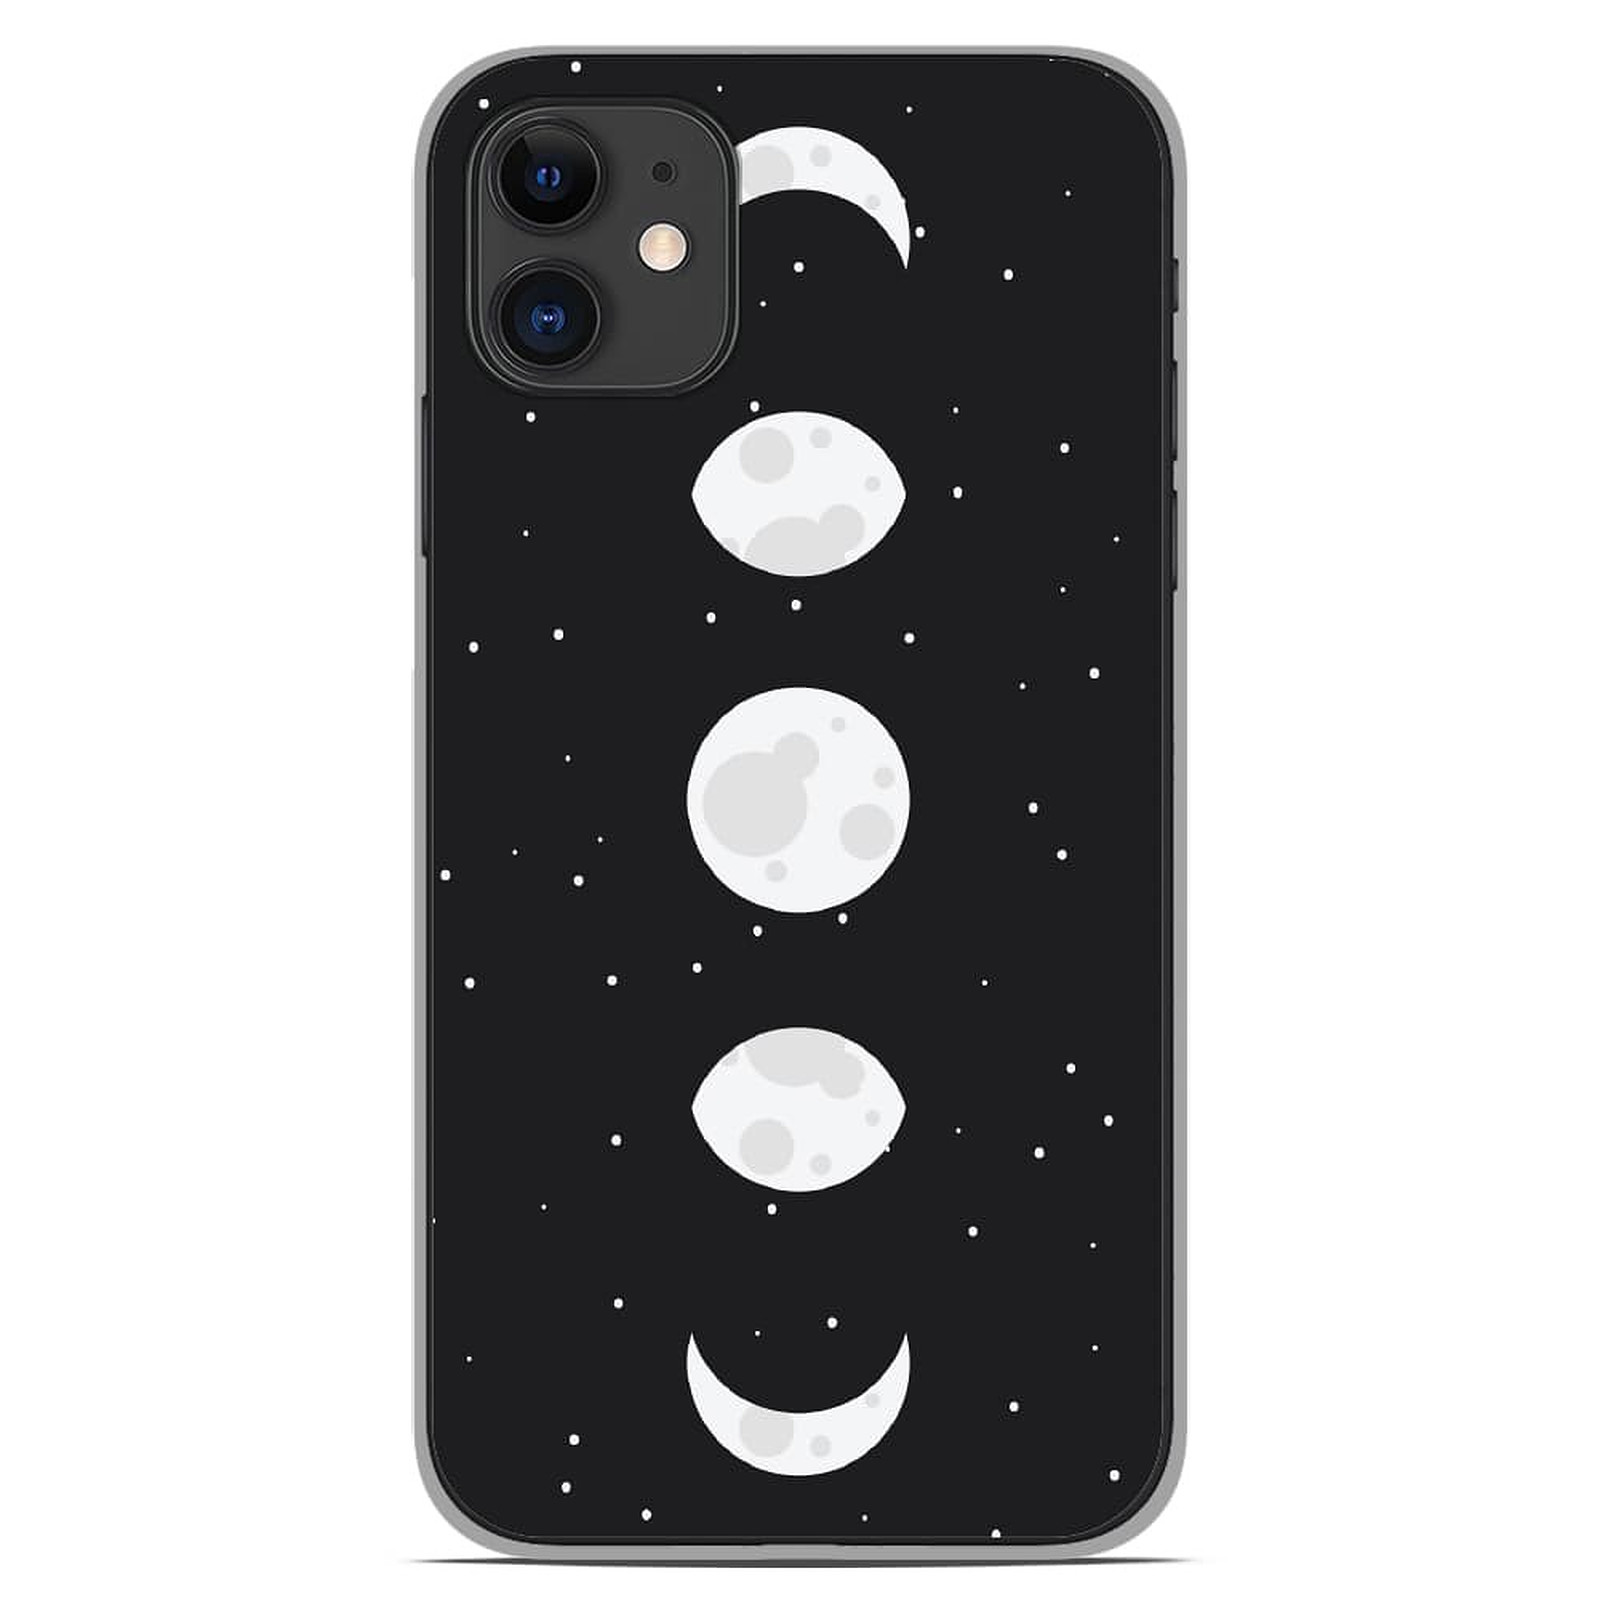 1001 Coques Coque silicone gel Apple iPhone 11 motif Phase de Lune - Coque telephone 1001Coques